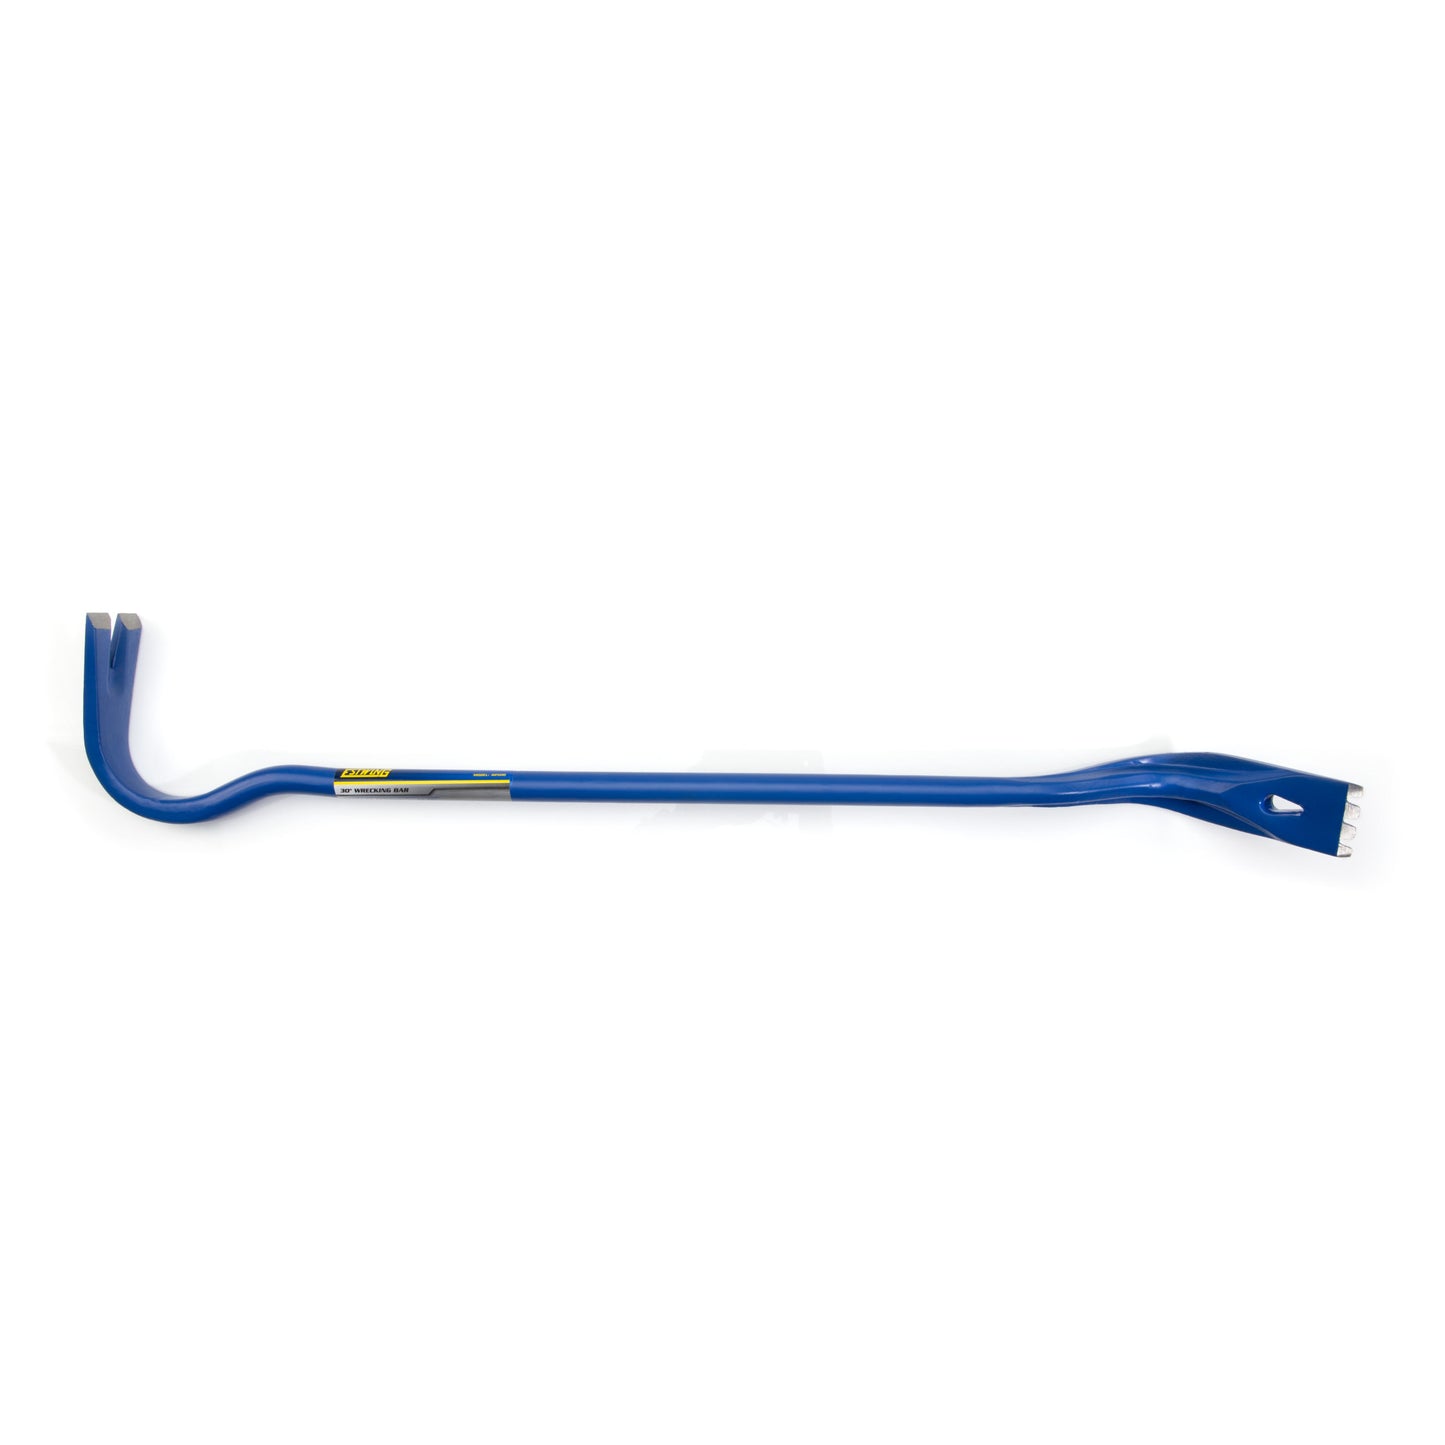 30-Inch Duck-foot Shingle Ripping Wrecking Bar and Pry Tool